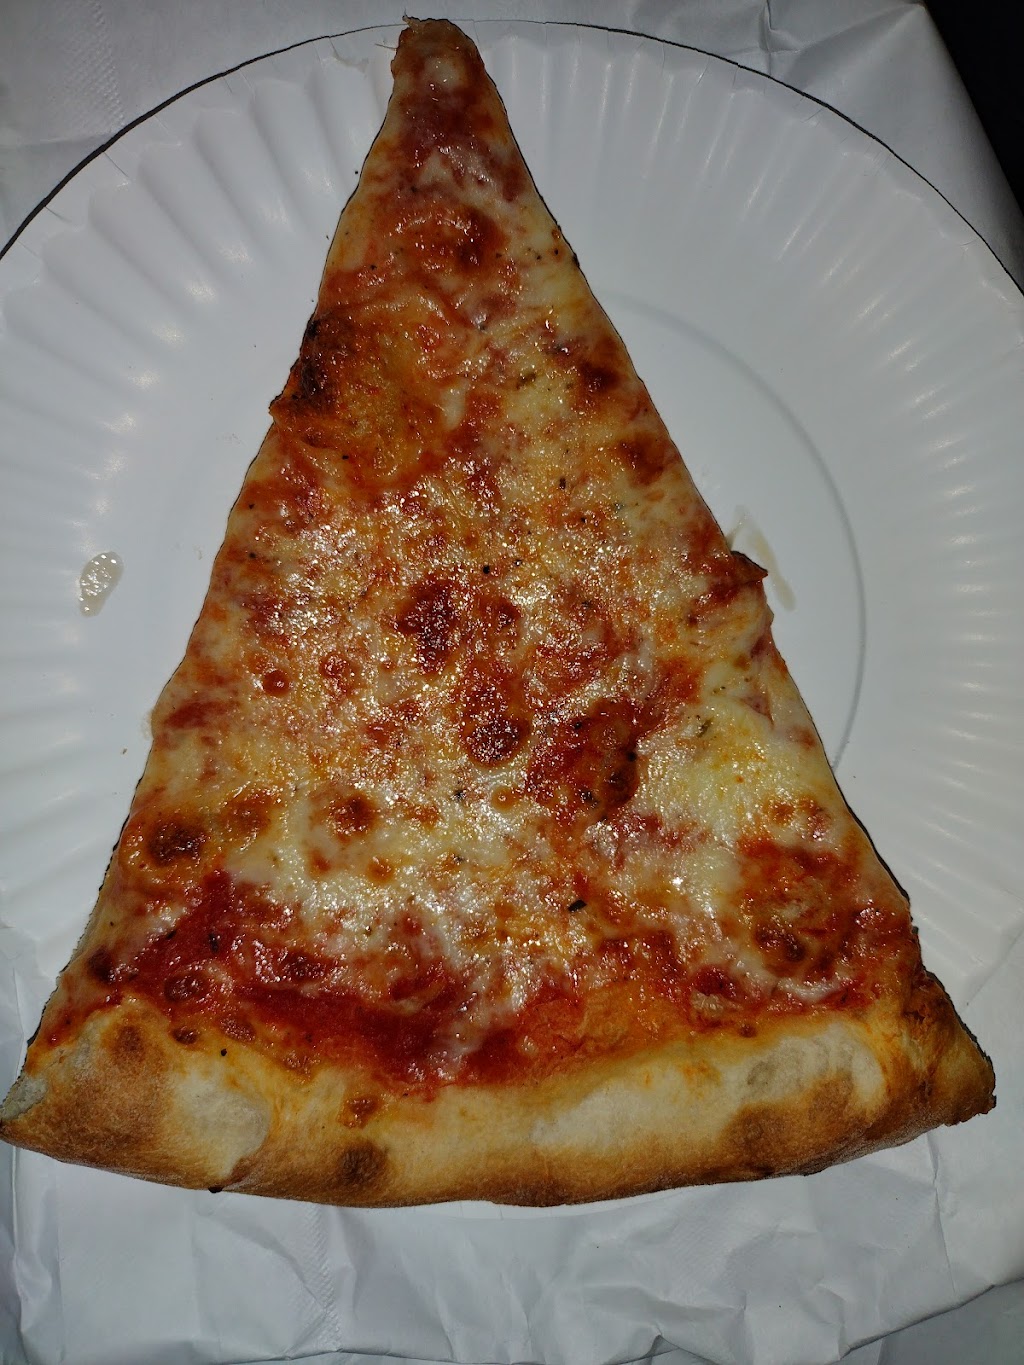 Rossville Pizza | 960 Bloomingdale Rd, Staten Island, NY 10309 | Phone: (718) 227-4444